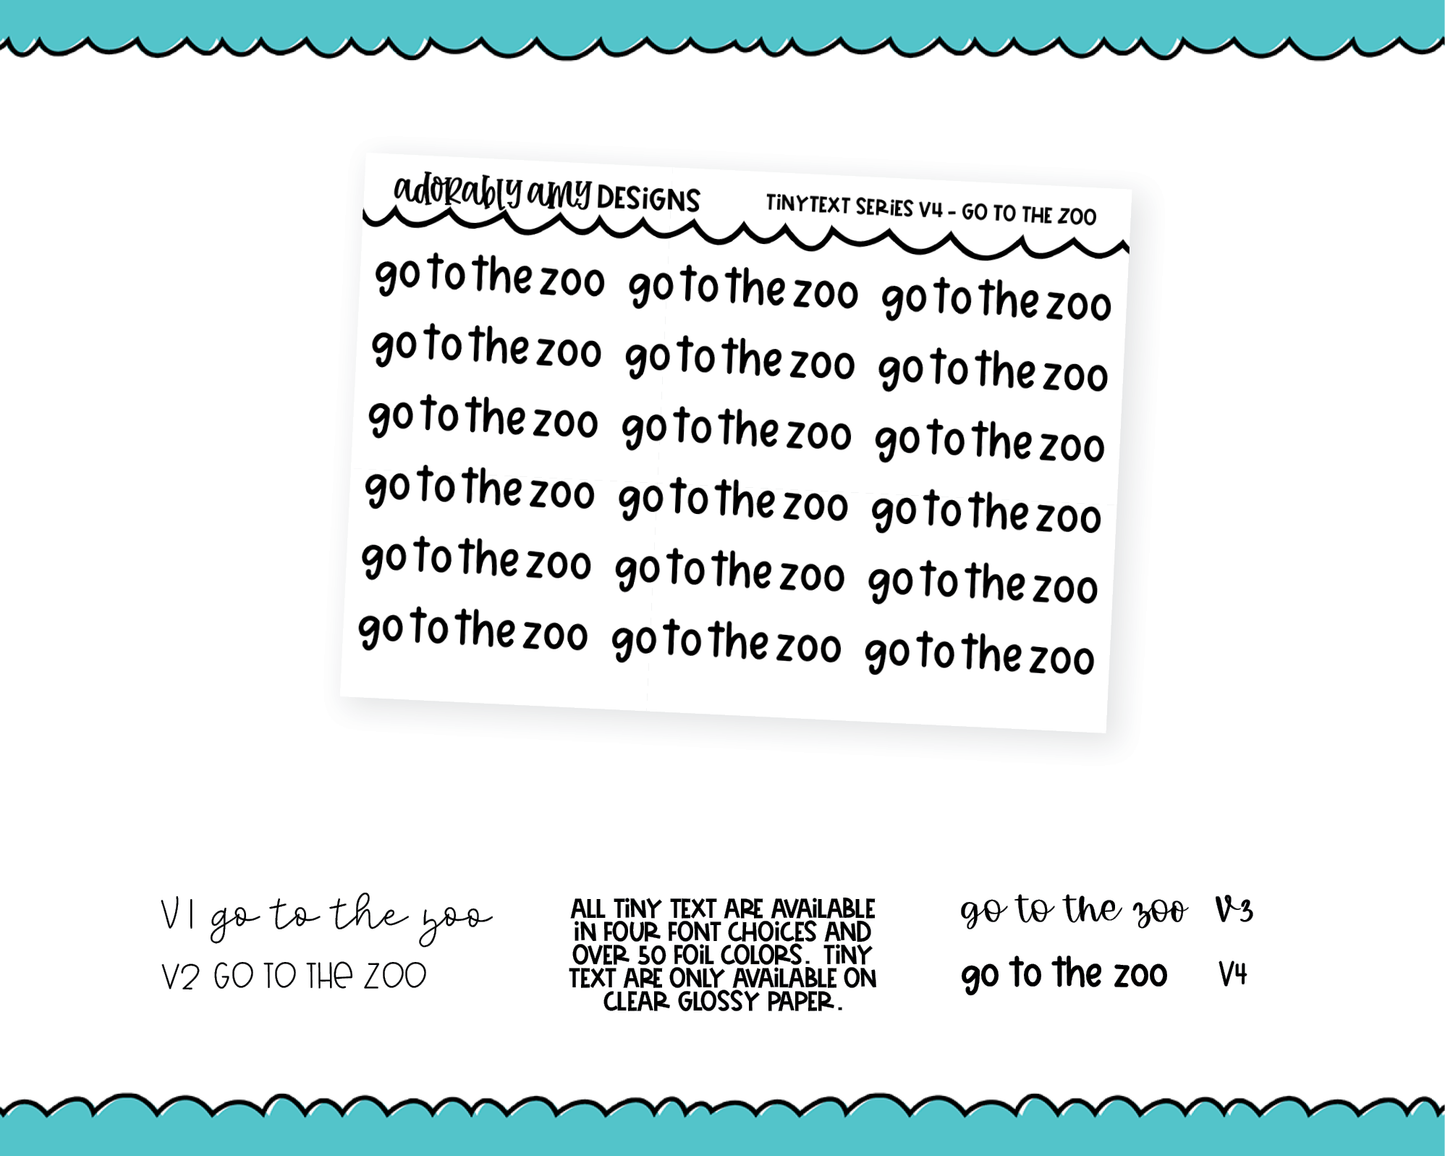 Foiled Tiny Text Series - Go To The Zoo Checklist Size Planner Stickers for any Planner or Insert